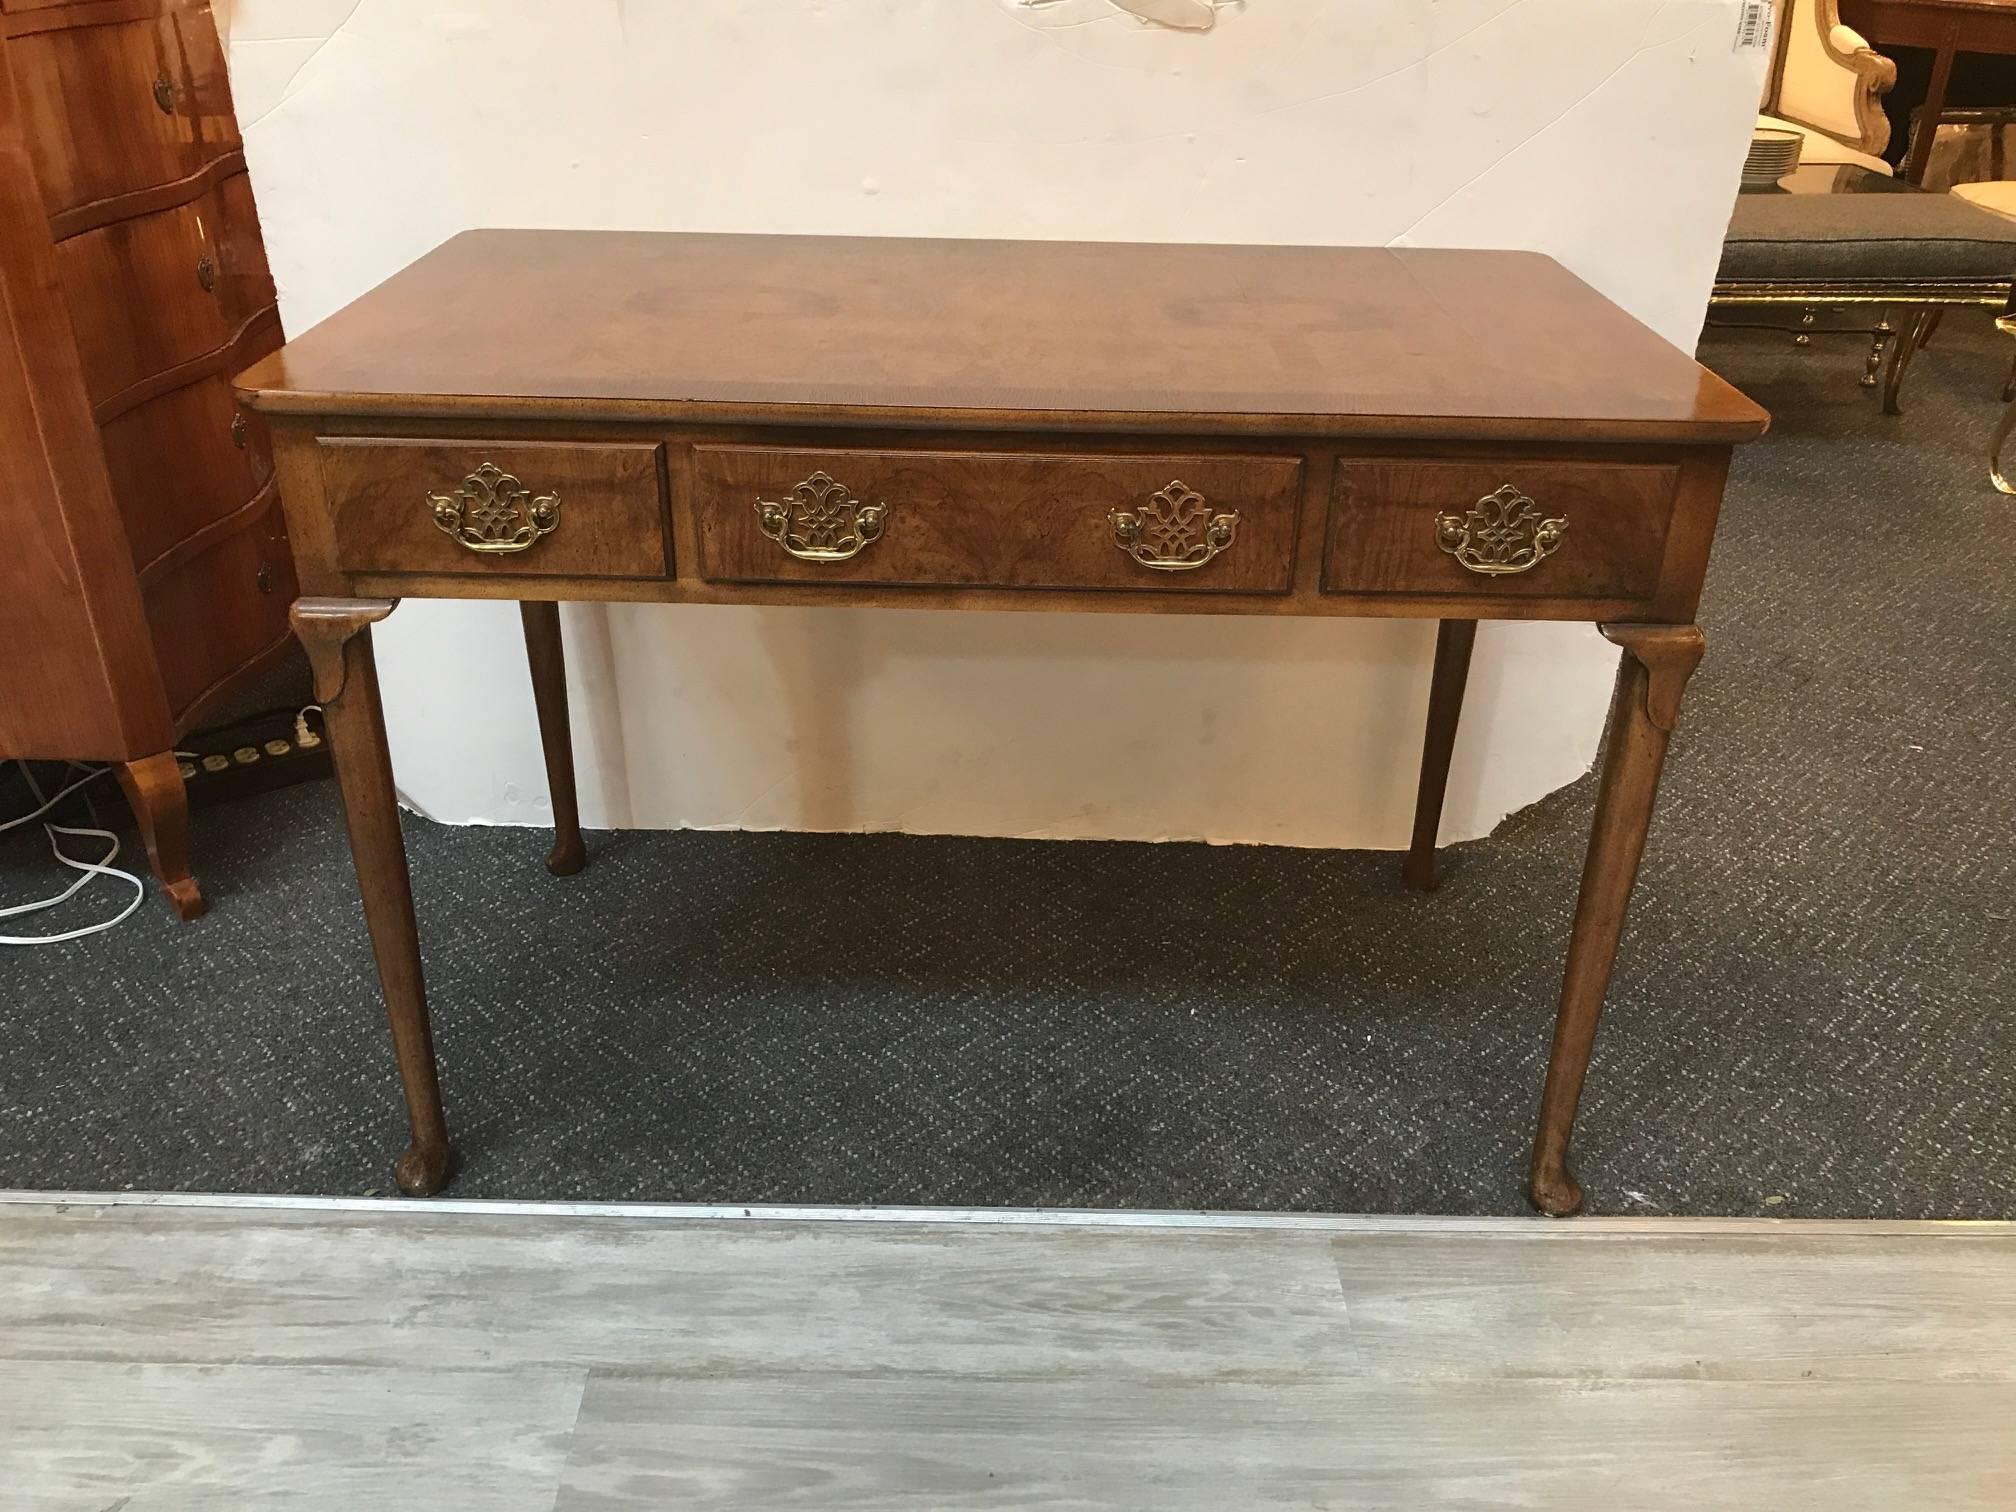 Classic English style writing table desk by Baker. The burl walnut top supported by four slightly carved Queen Anne legs with pierced Chippendale style solid brass hardware, marked baker inside one drawer. There is one centre drawer flanked by two